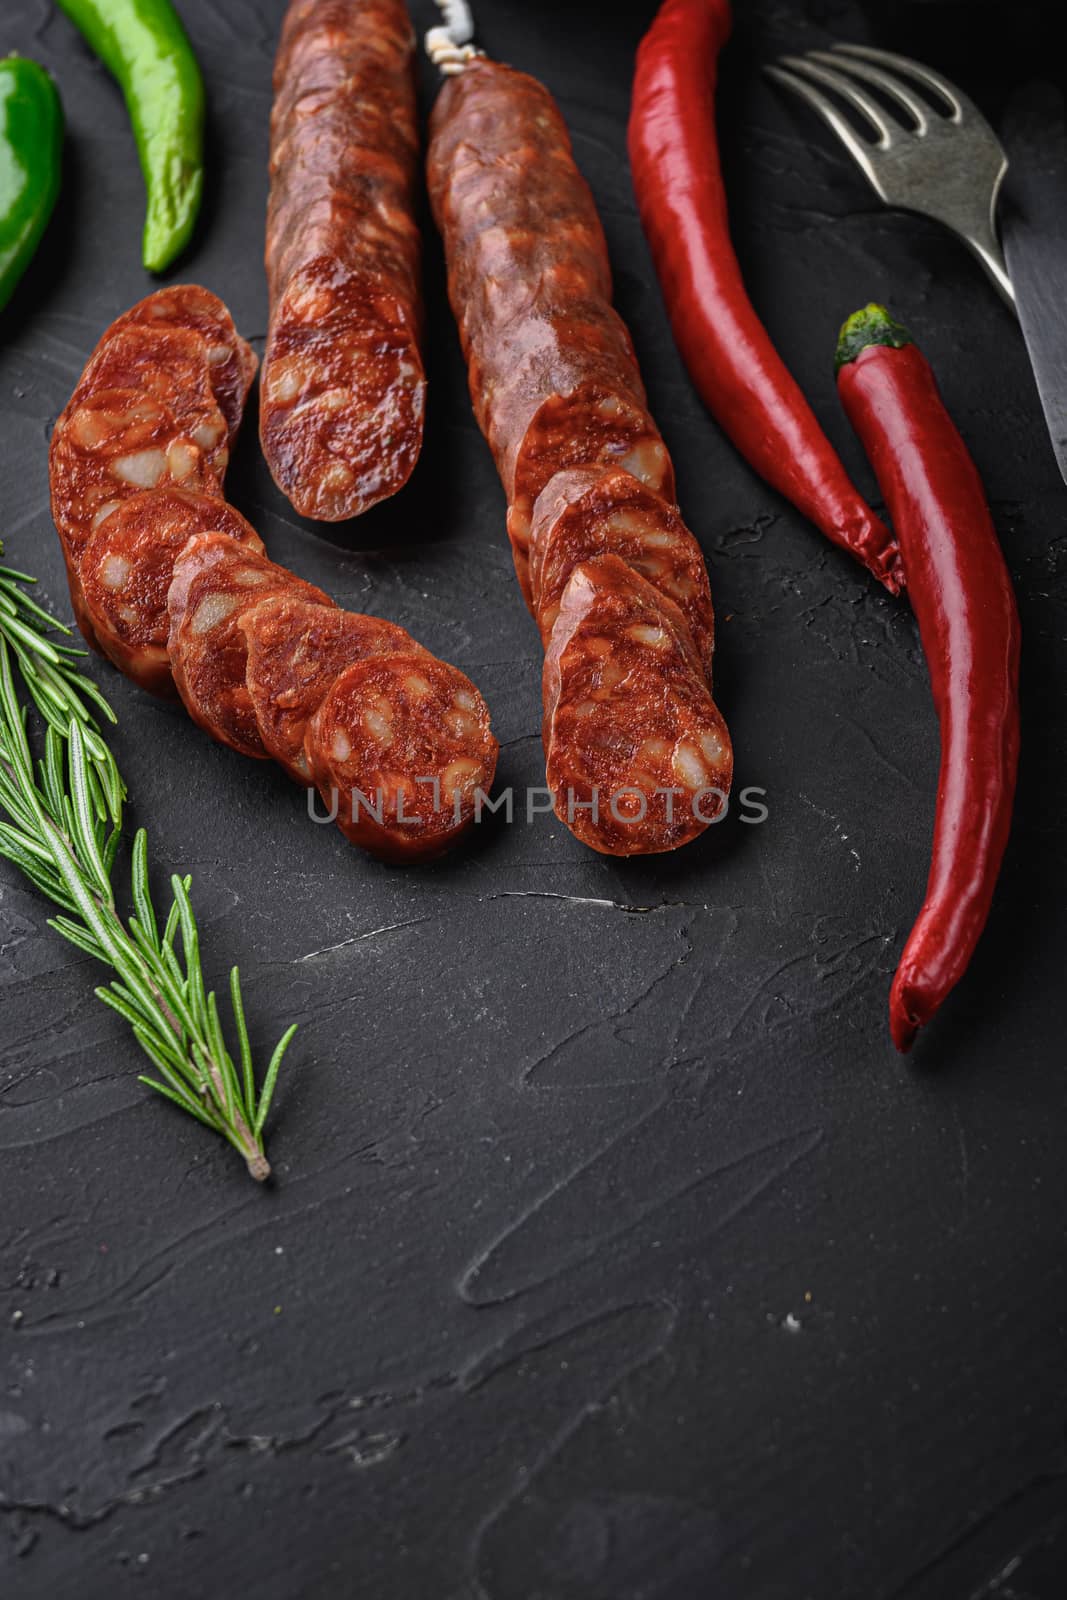 Spanish chorizo sausage slices with herbs and spices on black textured background with space for text.